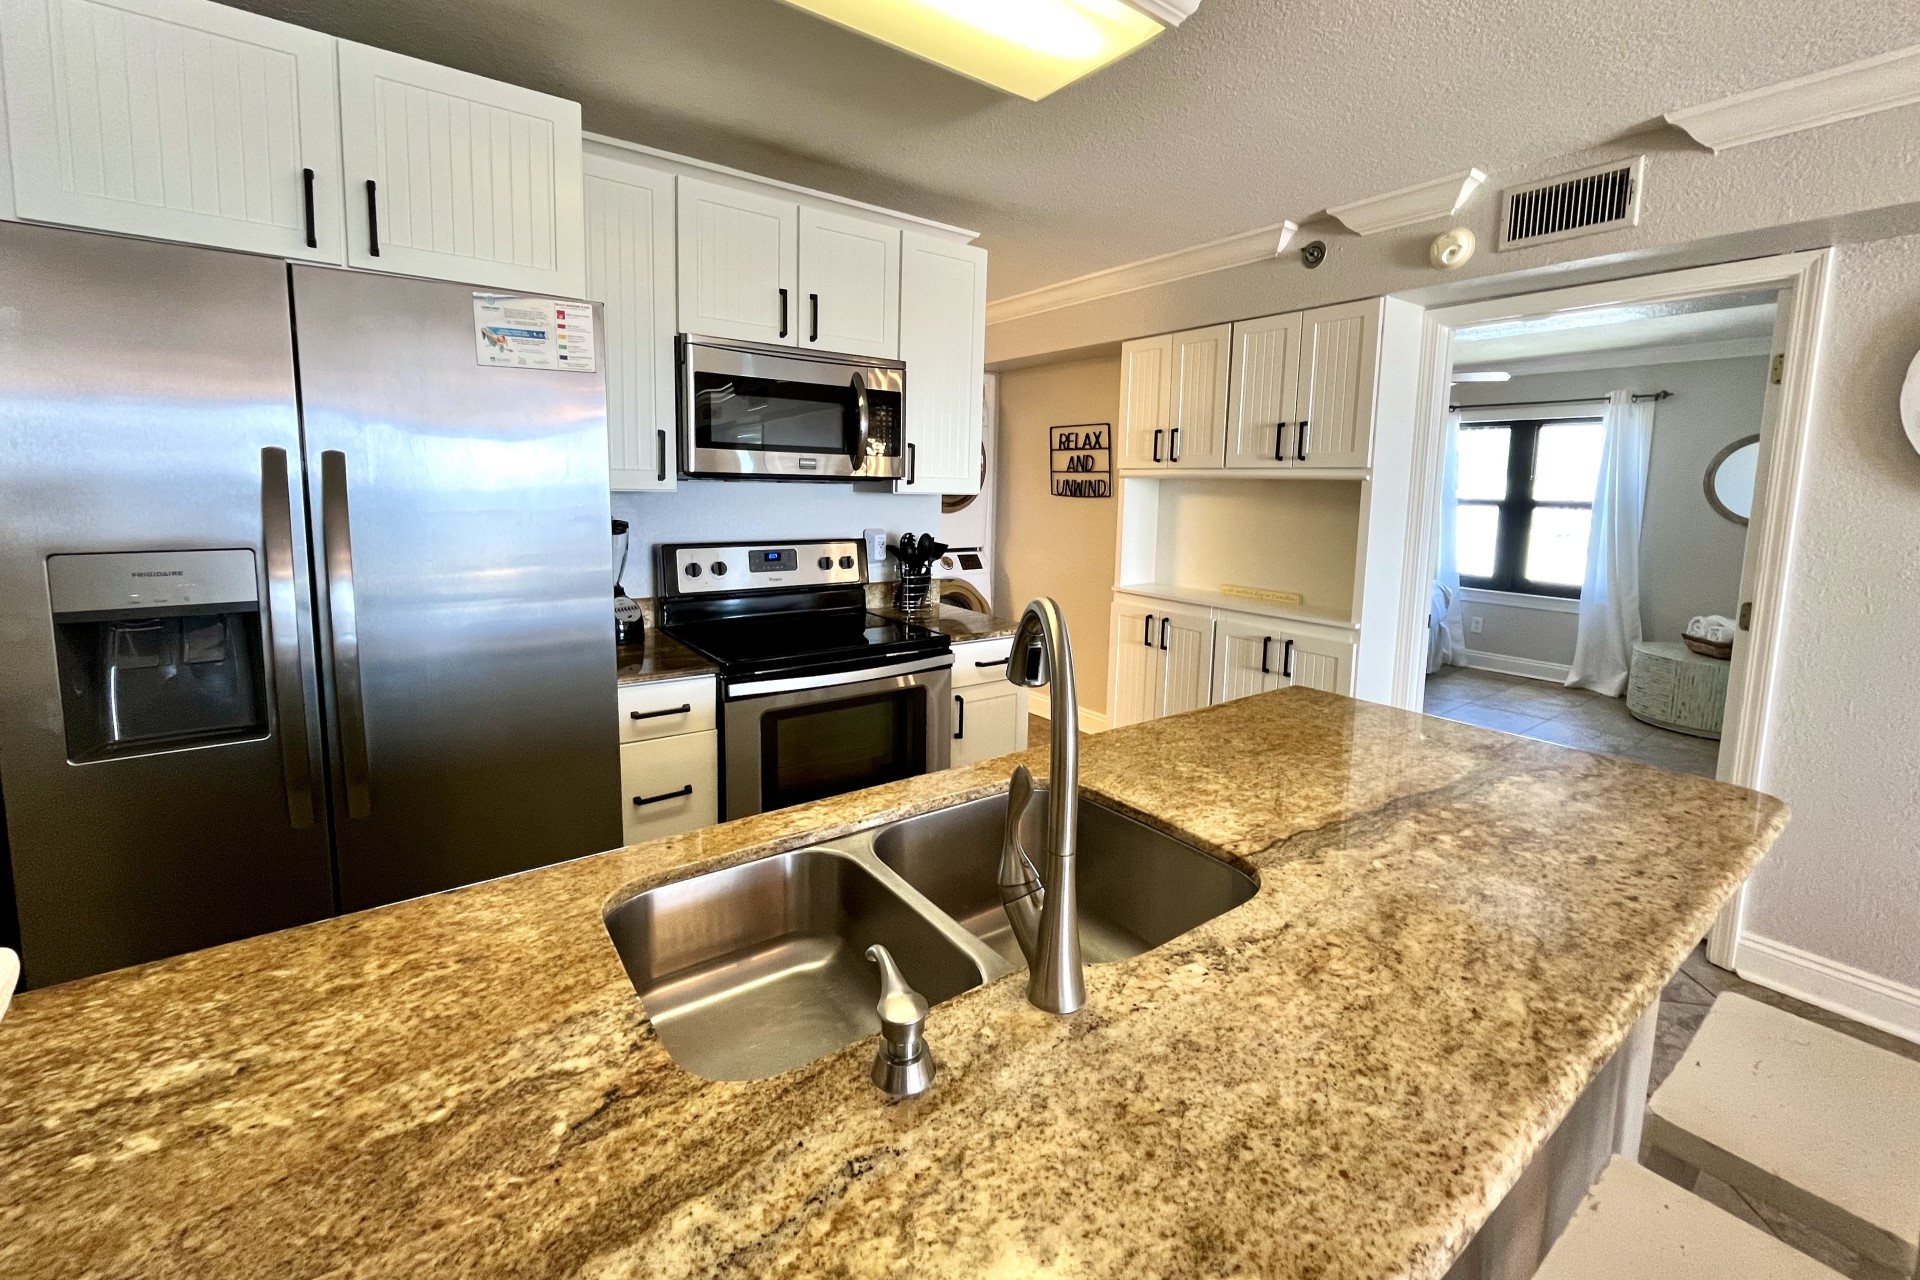 The gorgeous granite counters offer plenty of prep space!